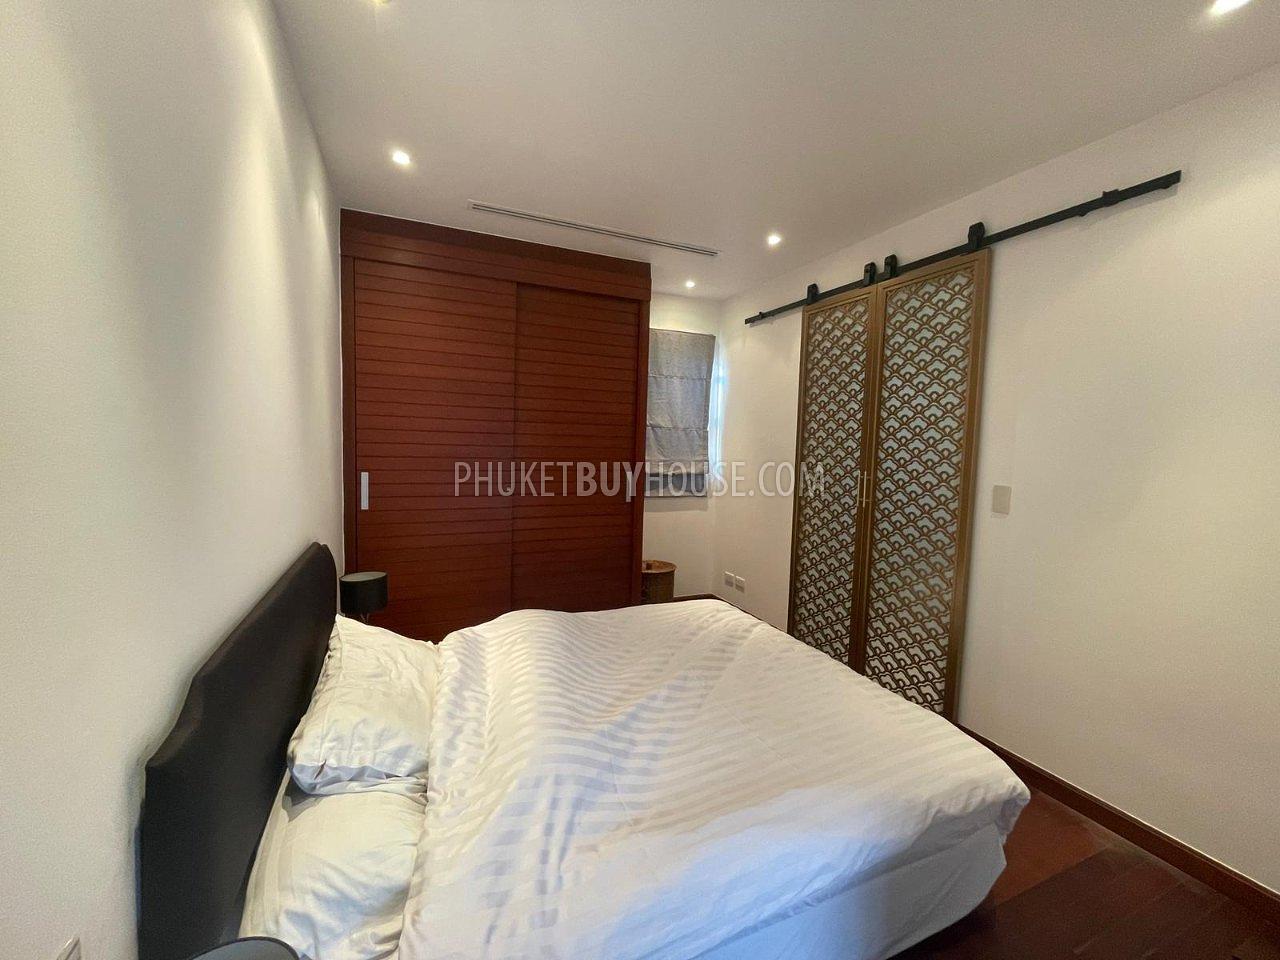 BAN6988: Lovely 1 bedroom House for Sale in Bang Tao area. Photo #8